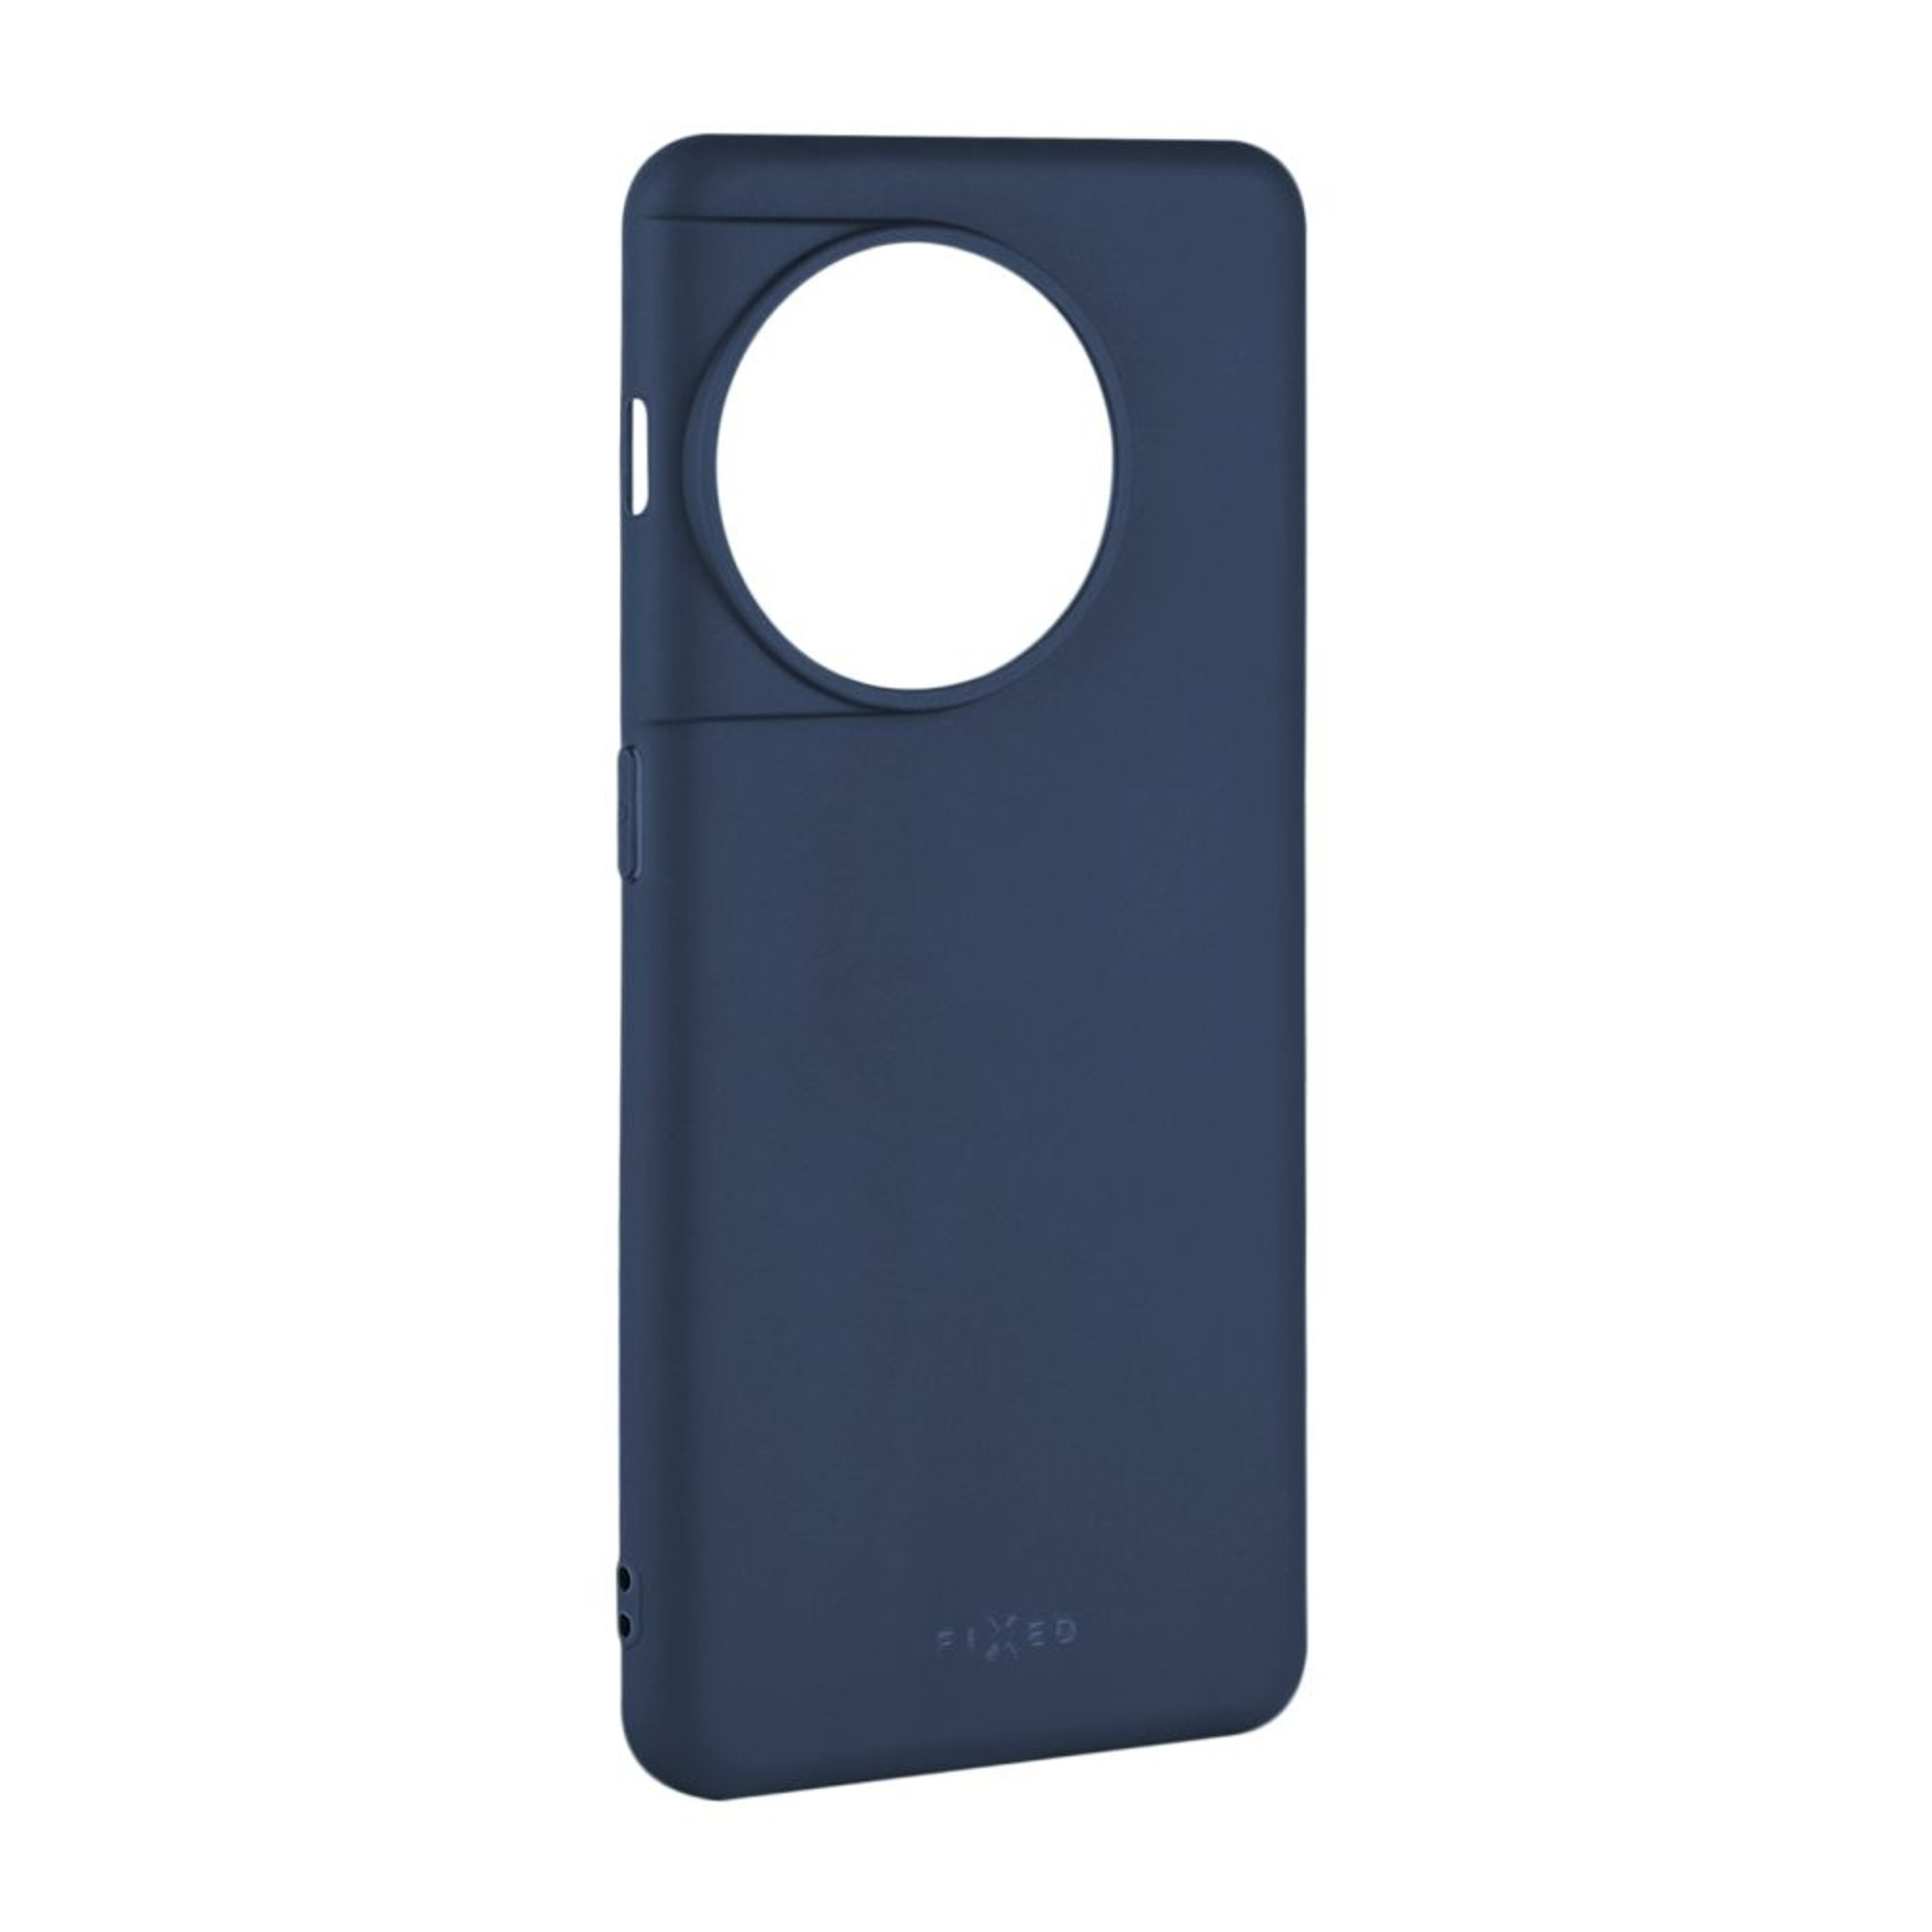 Backcover, Blau 11 5G, FIXST-1095-BL, OnePlus, FIXED